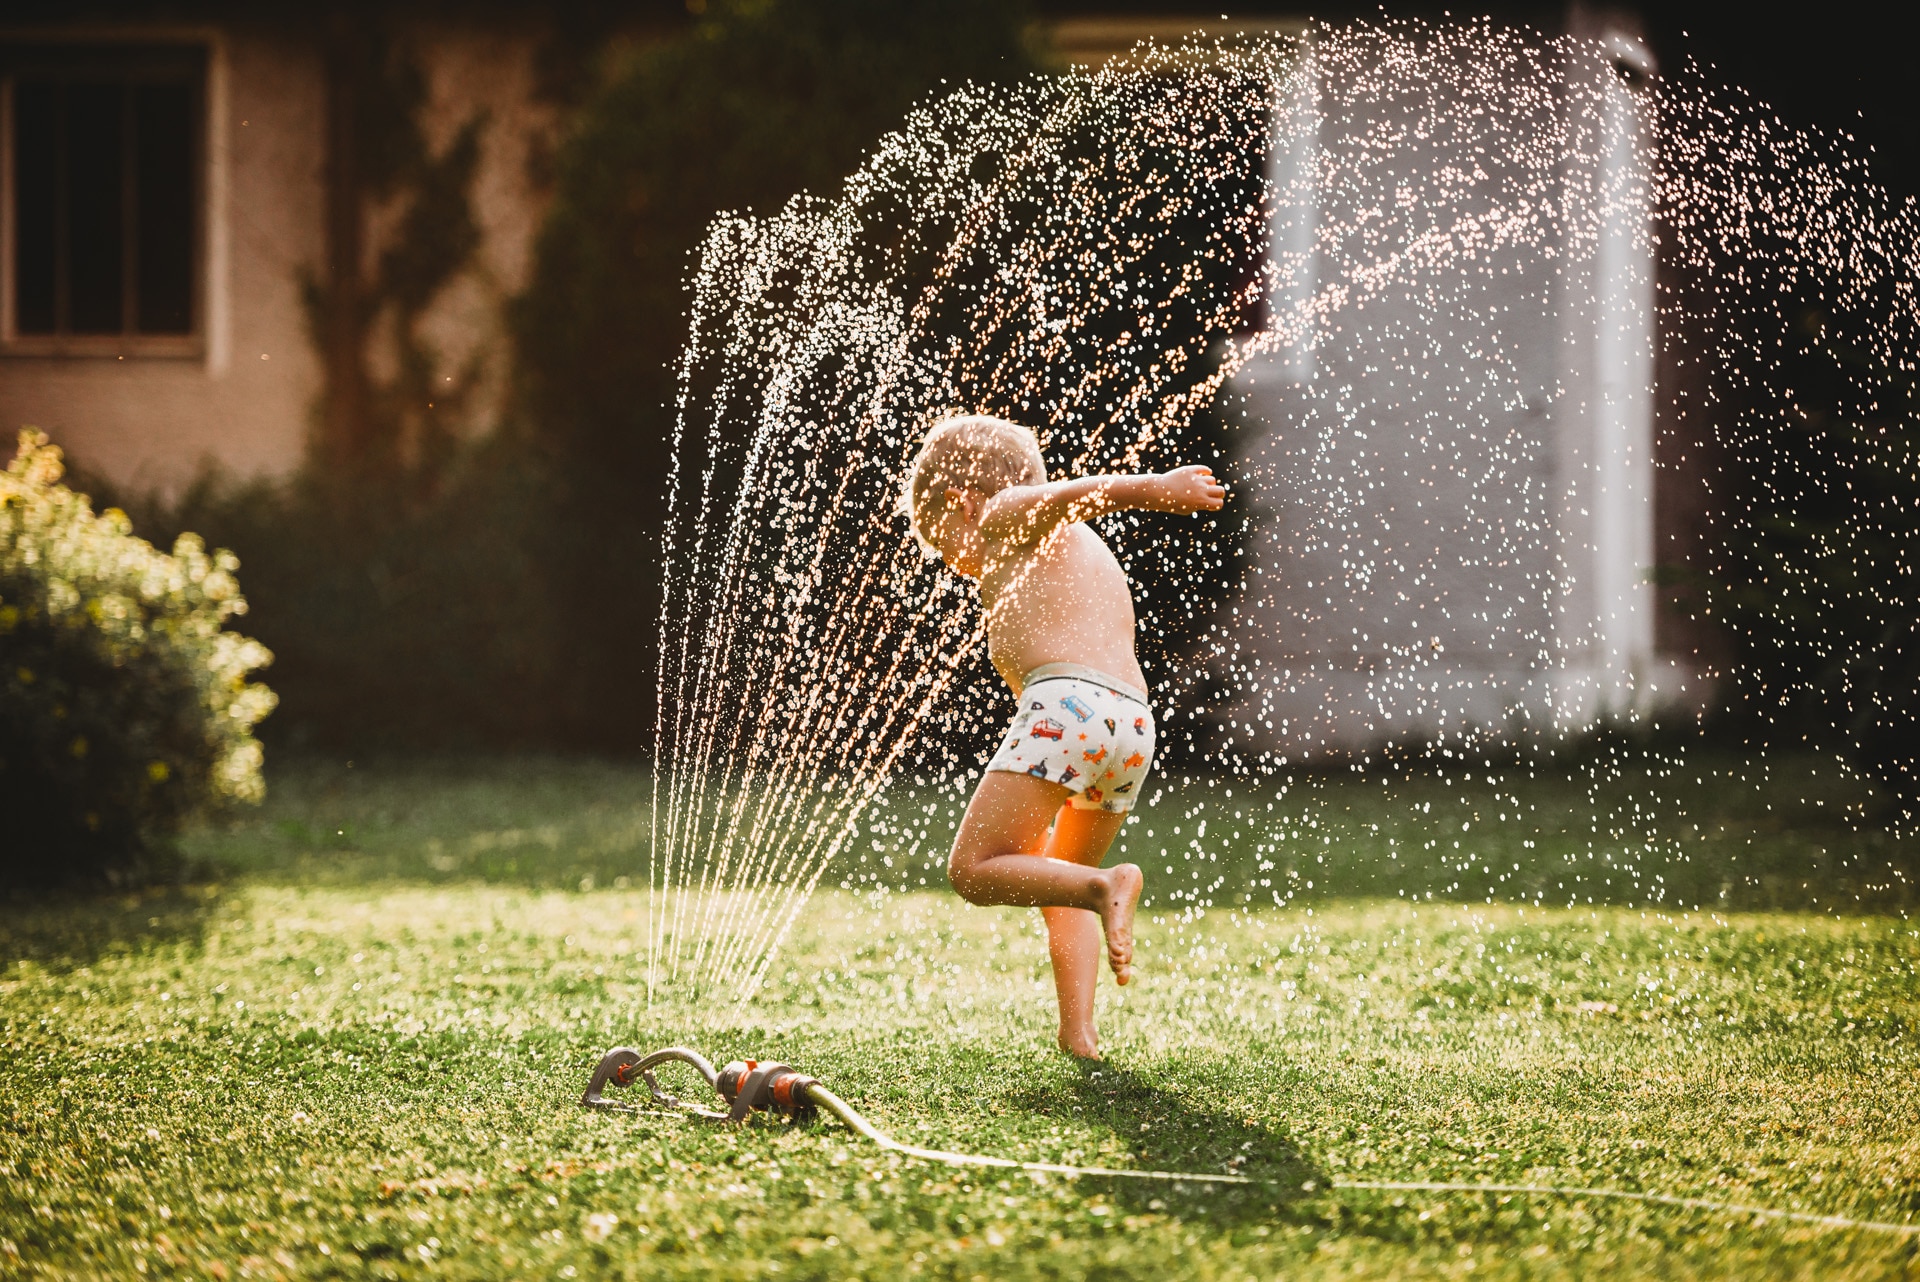 Young boy running under the water from a sprinkler in a garden.